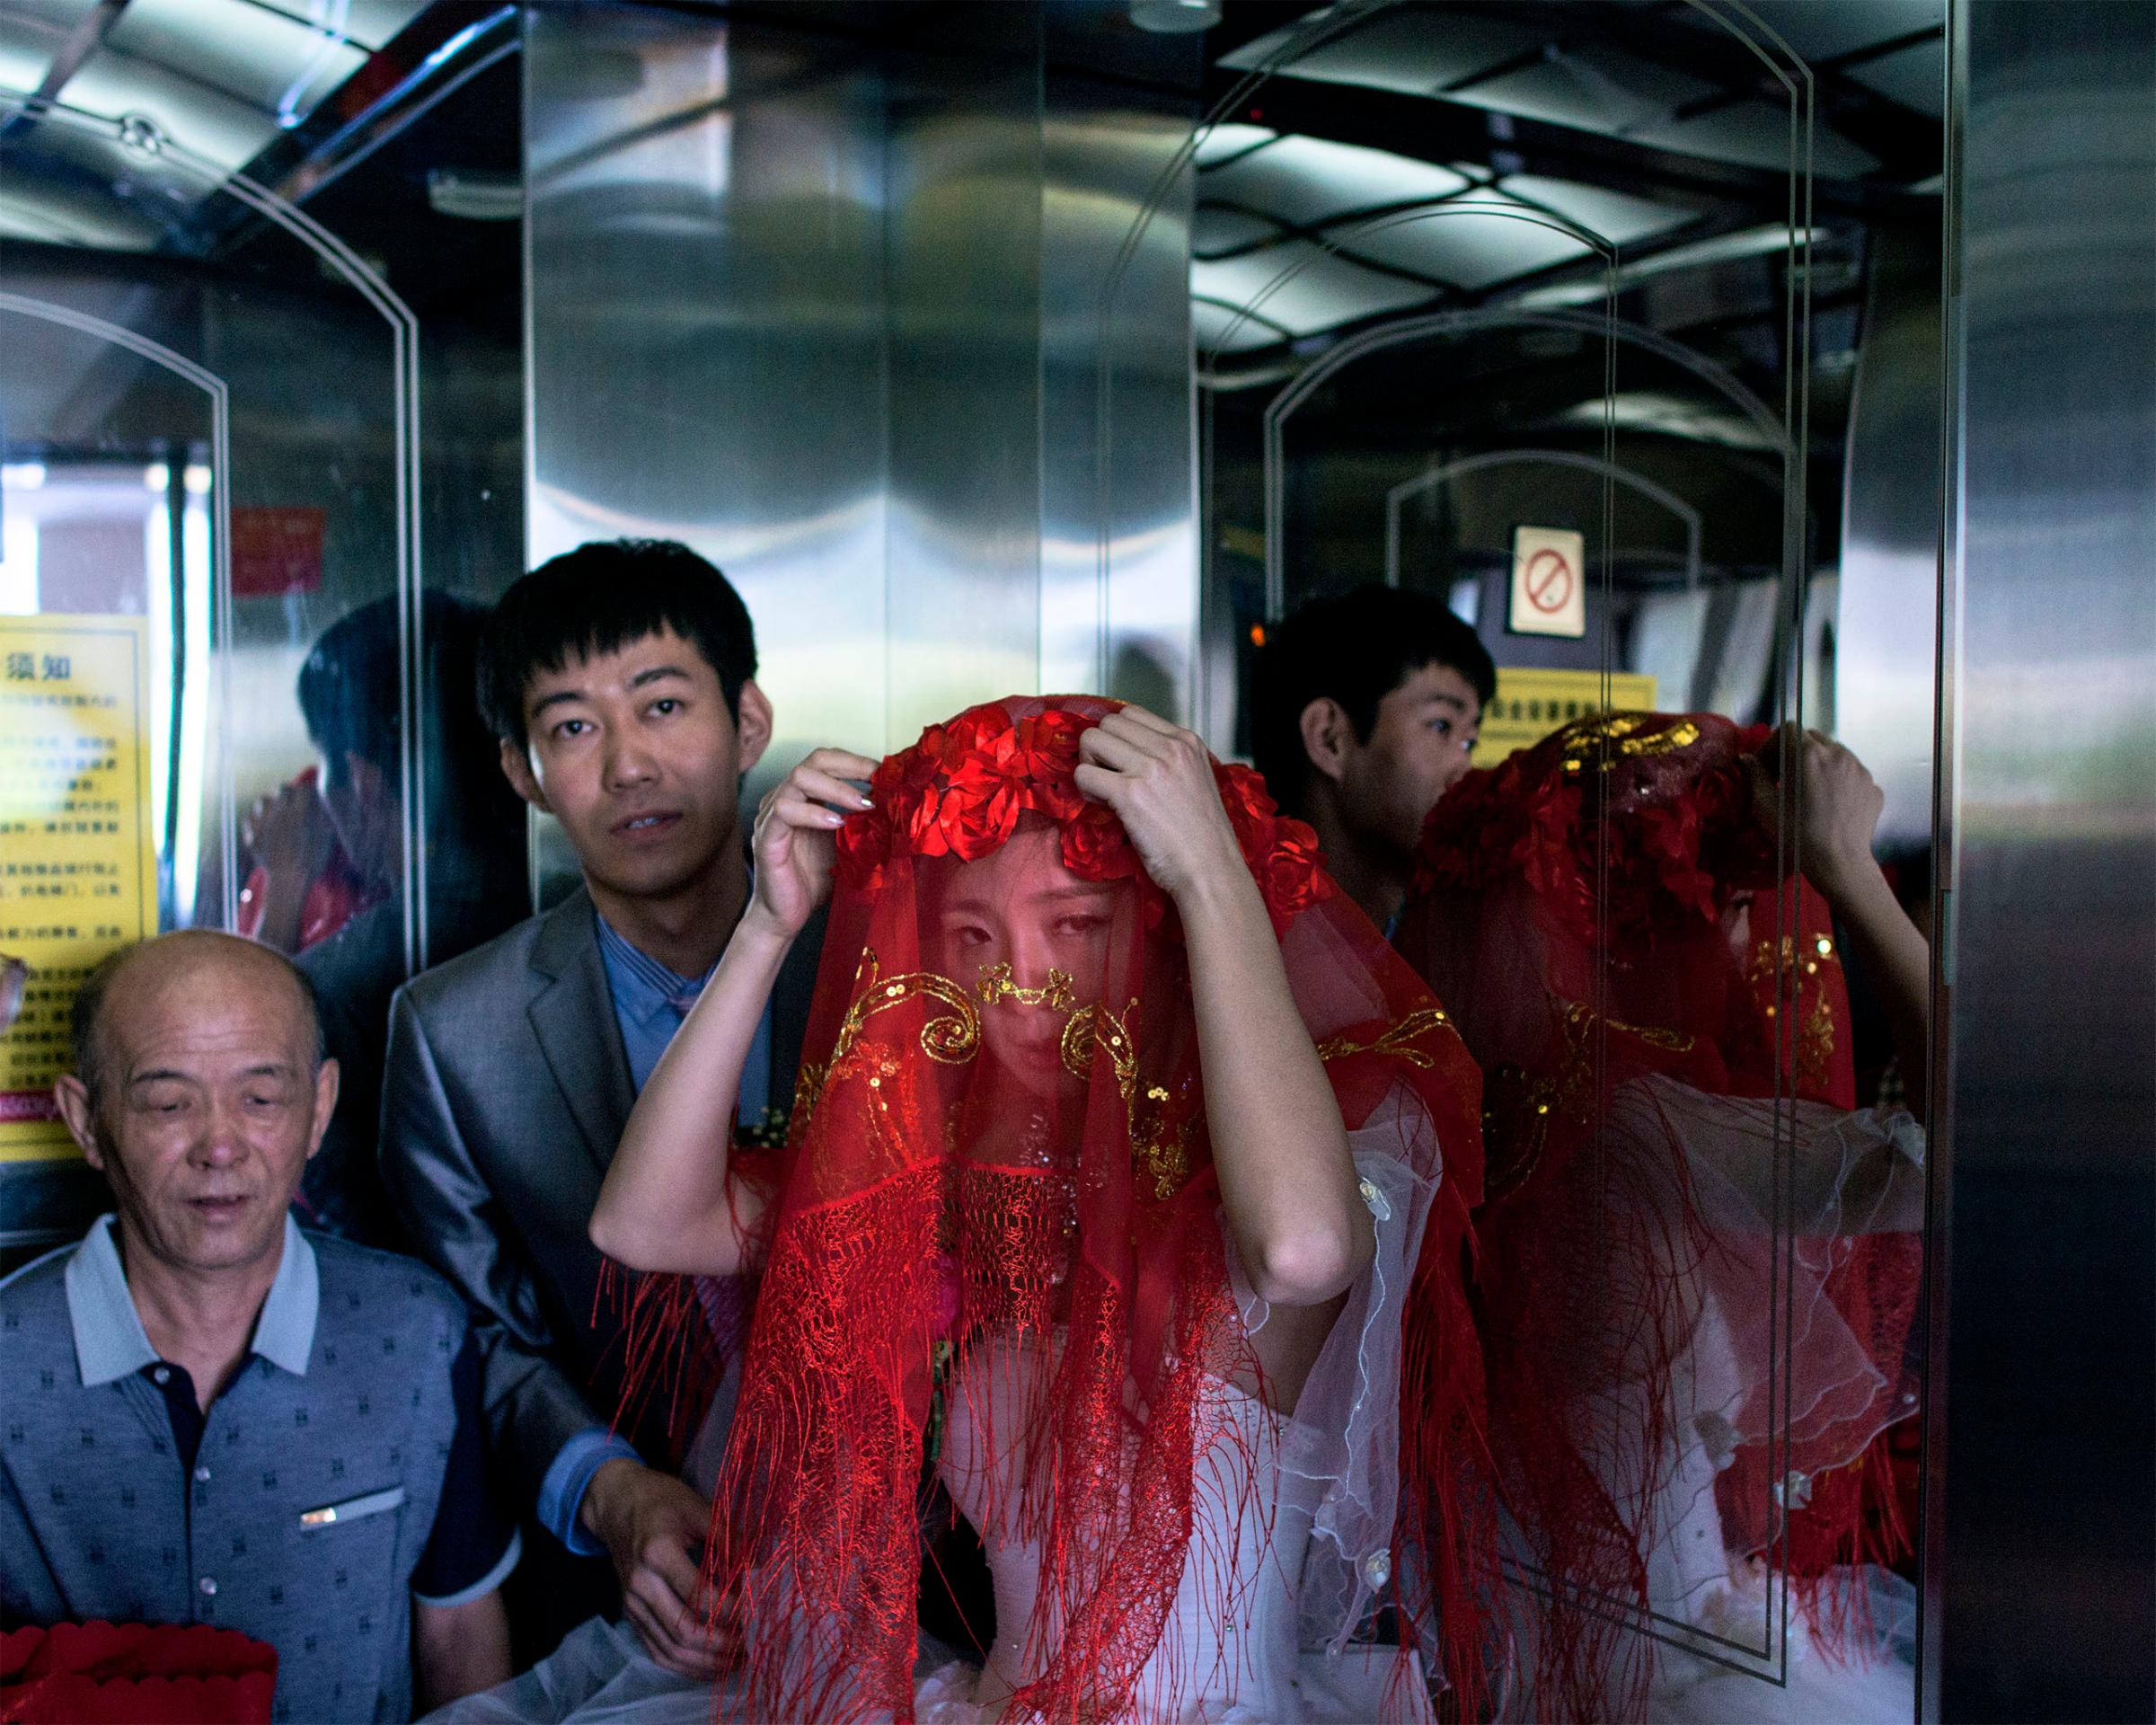 A bride adjusts her veil near Jian, China, about 1 km away from the North Korean border.